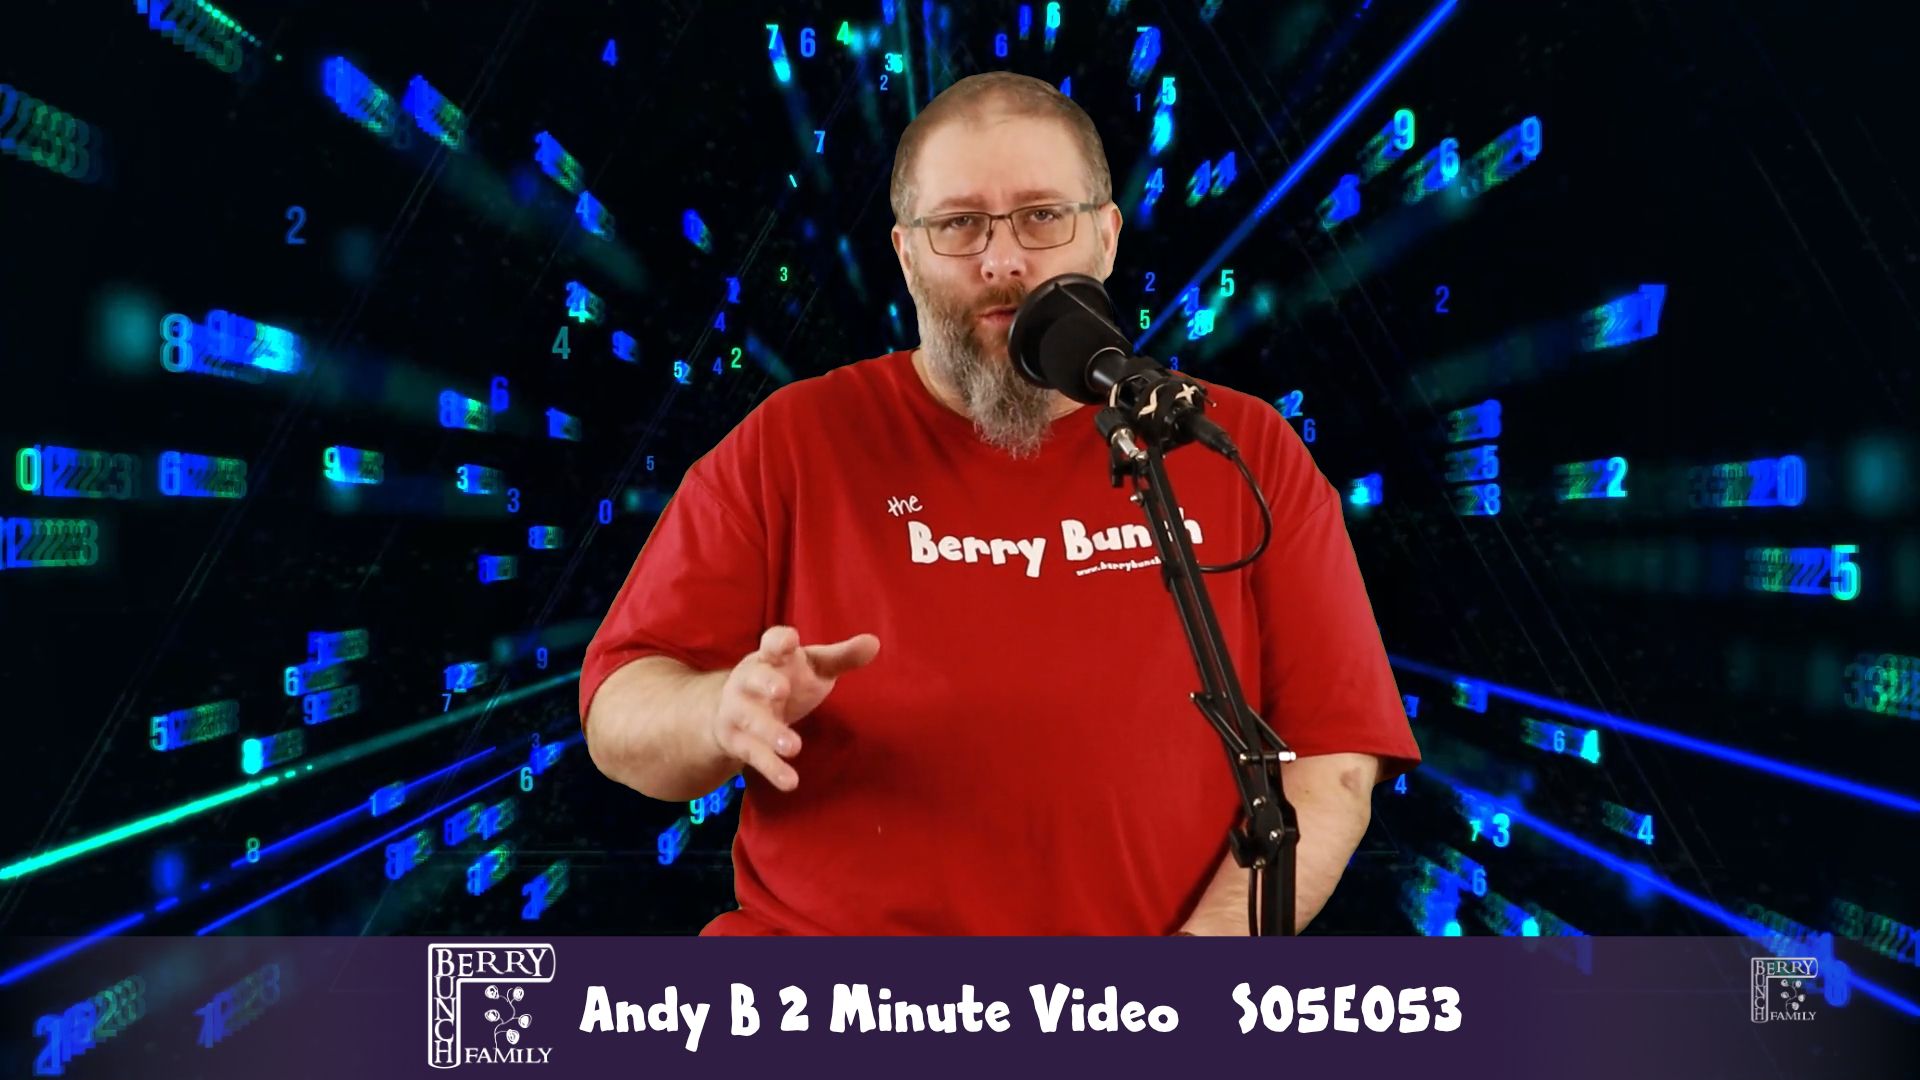 S05E053, Andy B 2 Minute Video